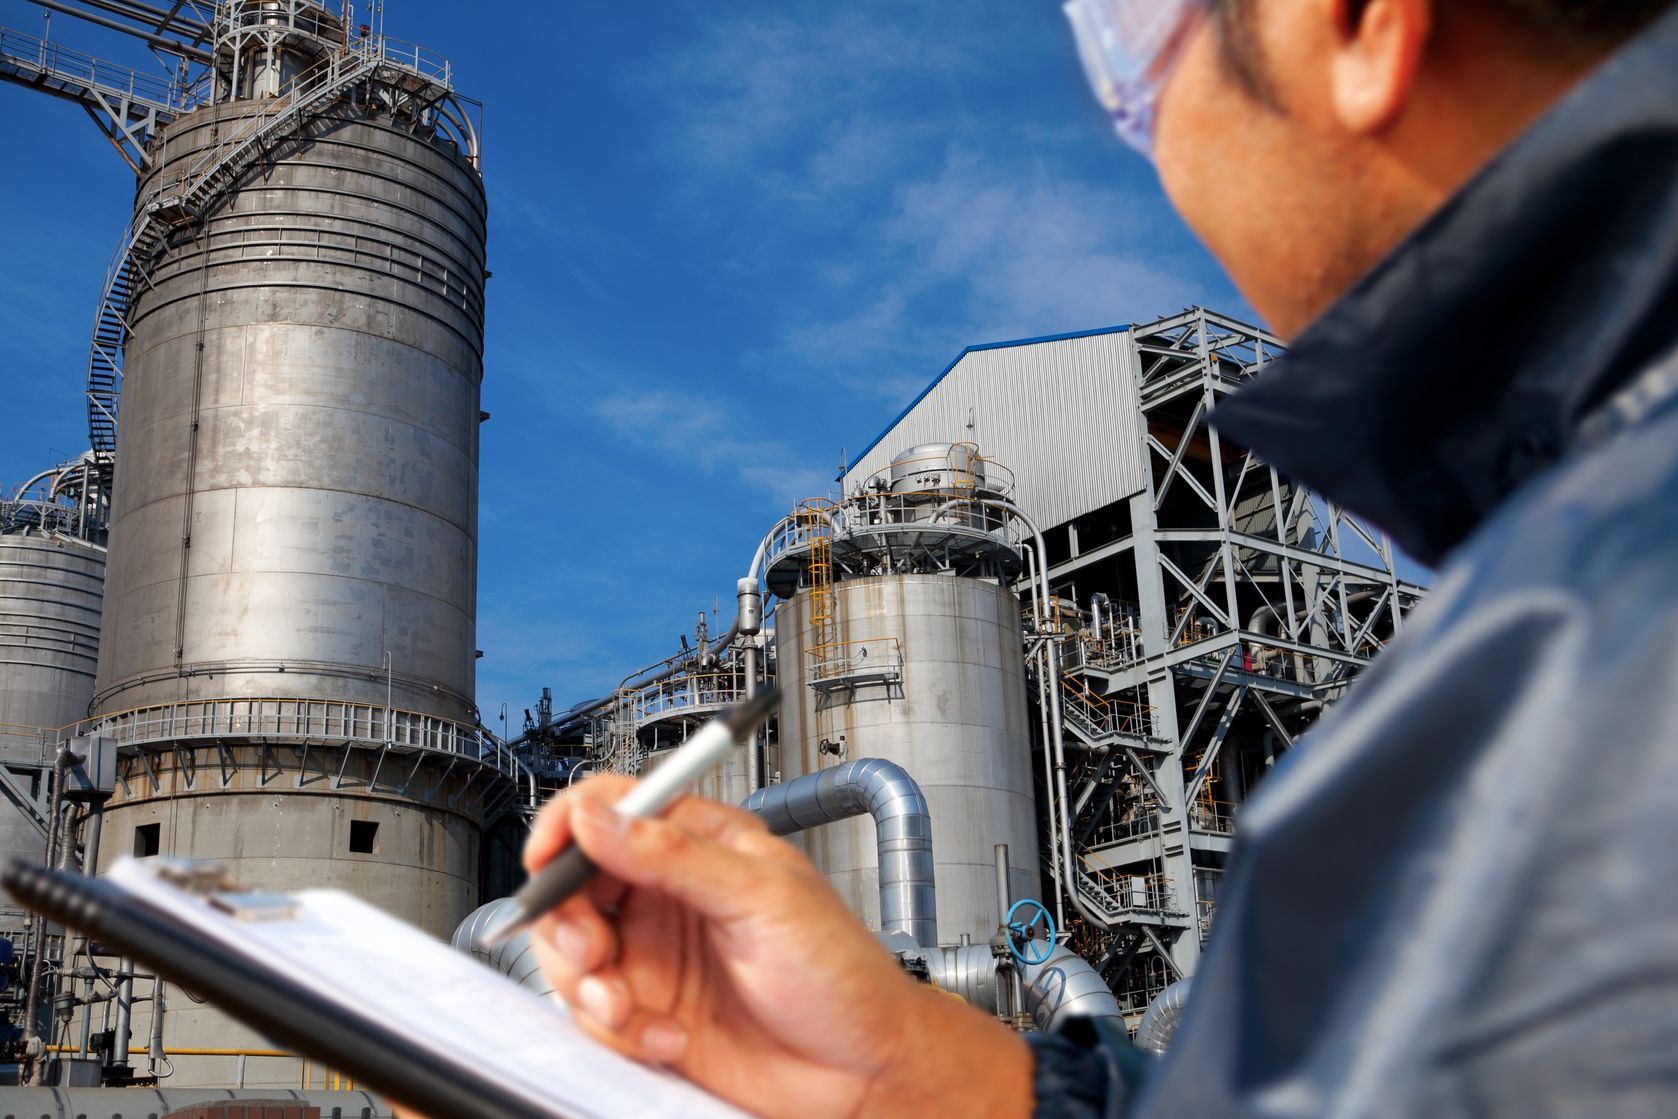 With careful planning and implementation, Yokogawa can help you achieve a safe, cost-effective, and value-added hot or cold cutover migration process for your system.